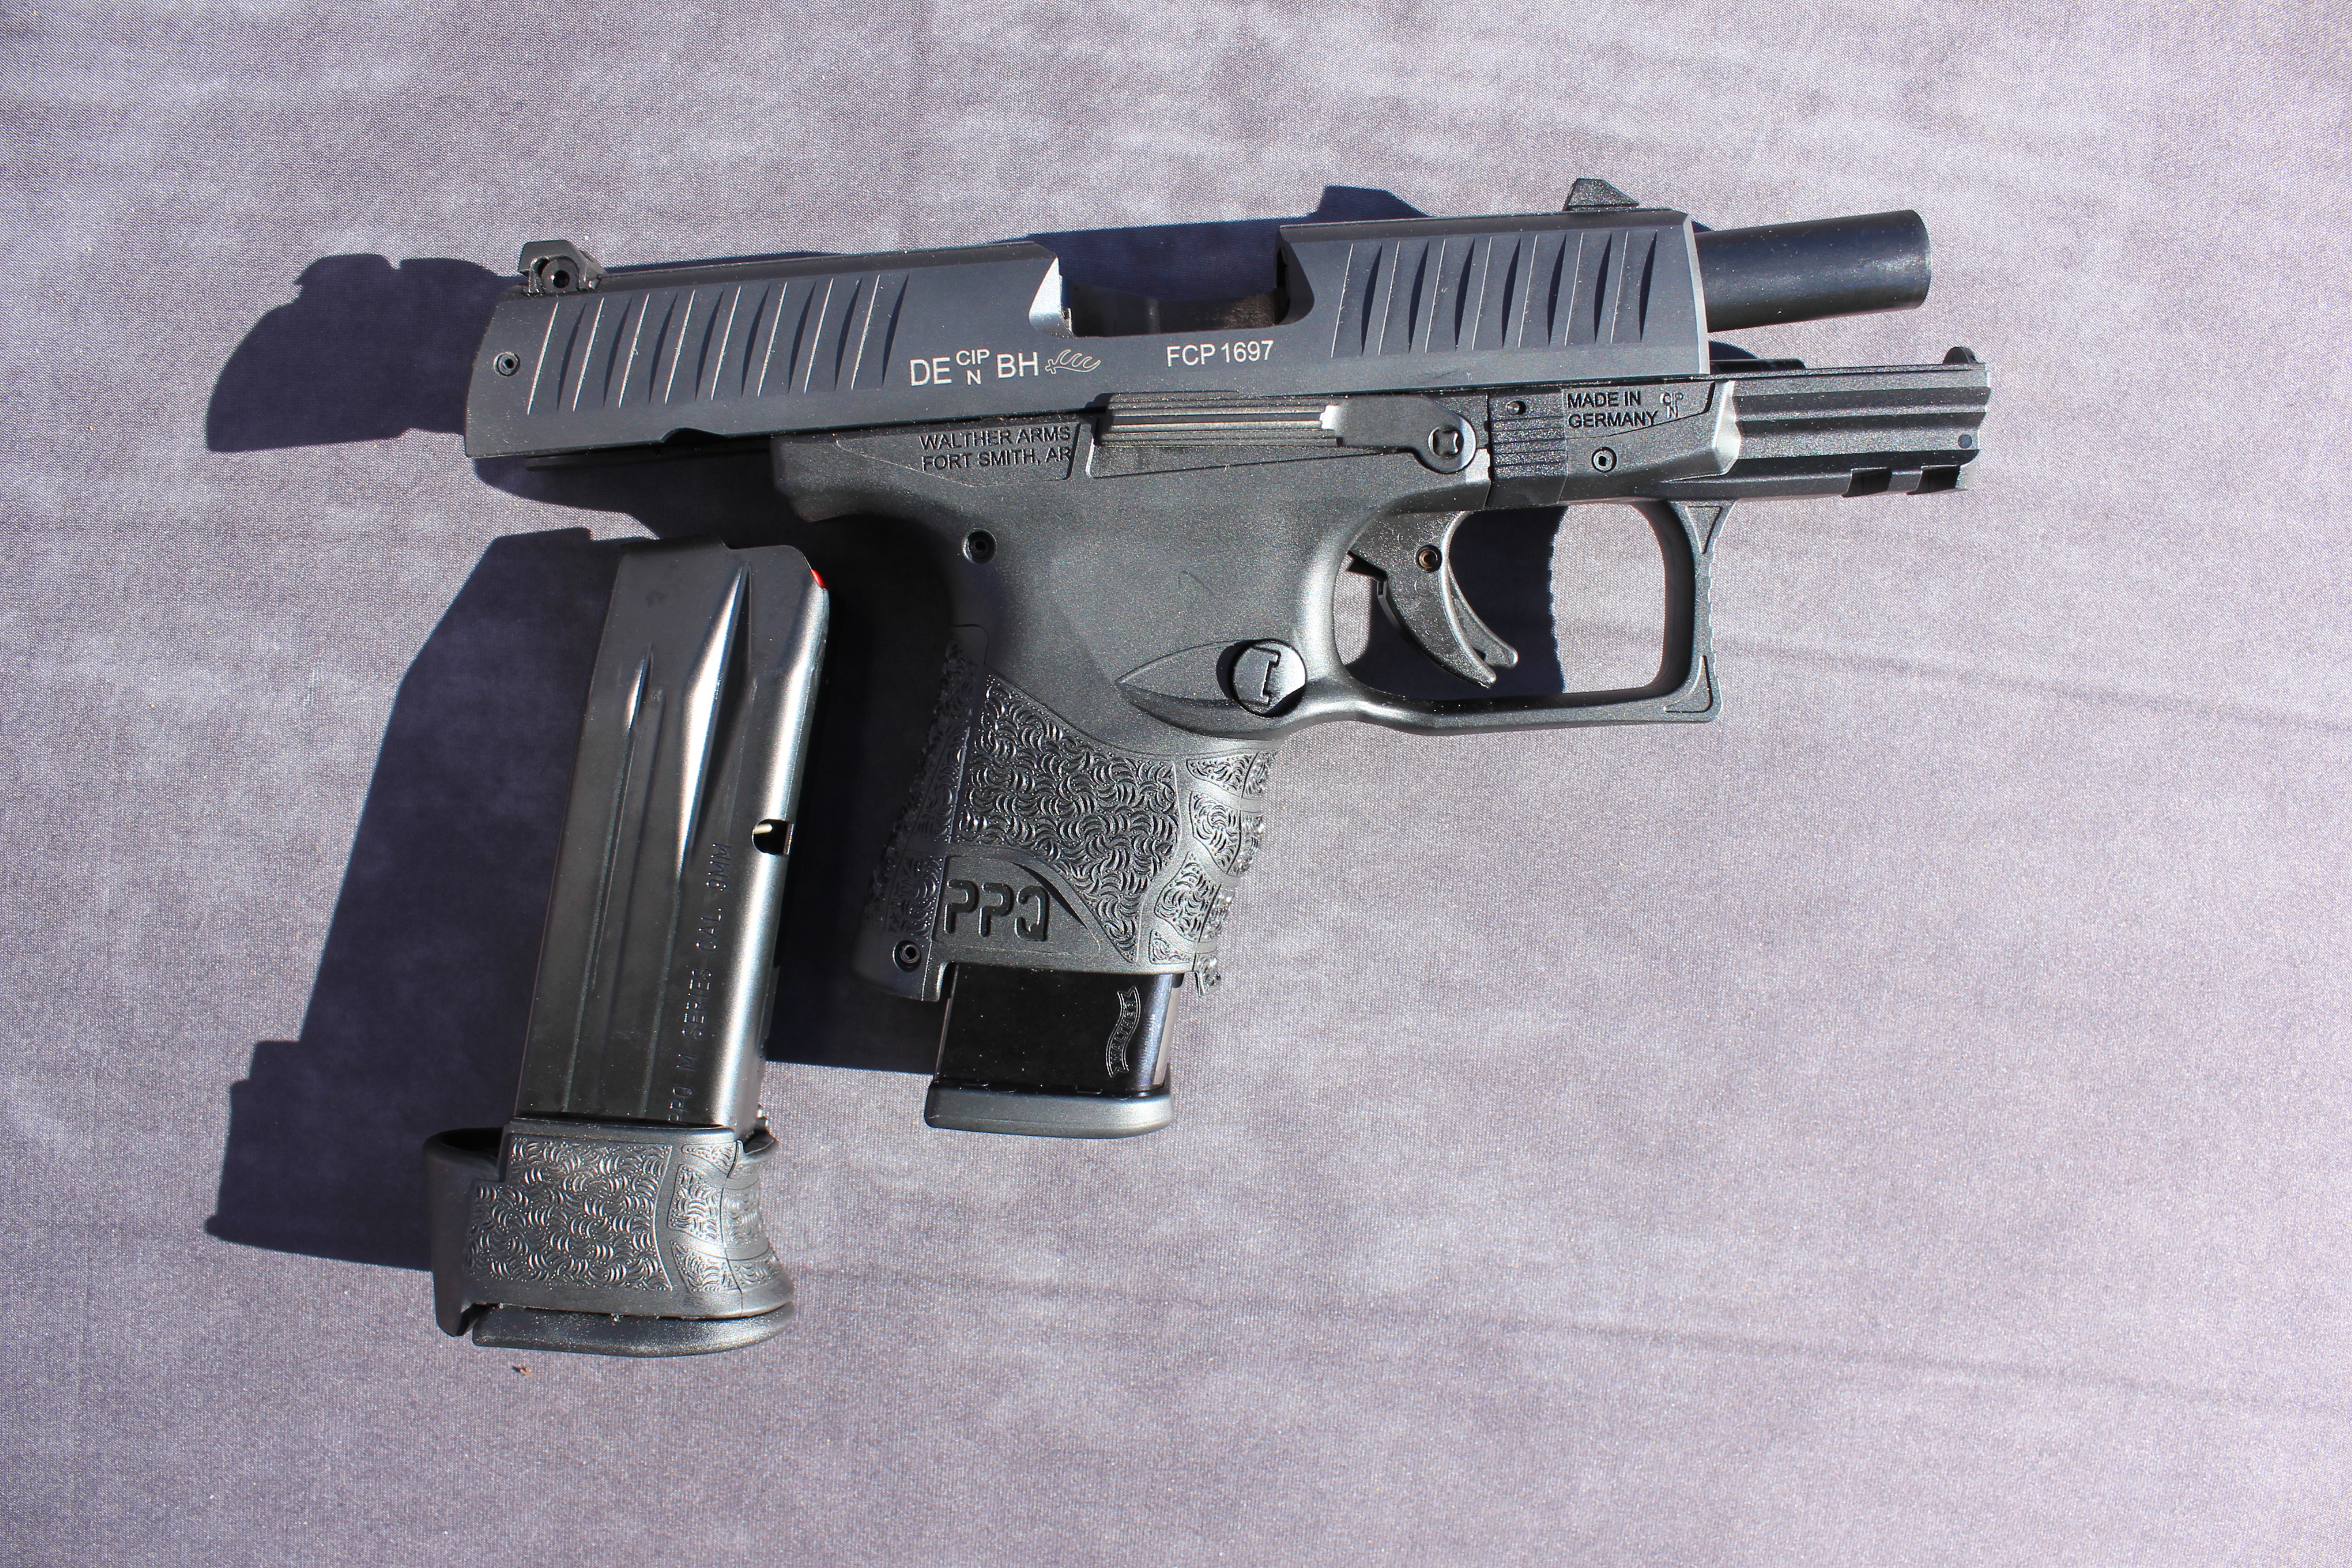 Walther PPQ SC